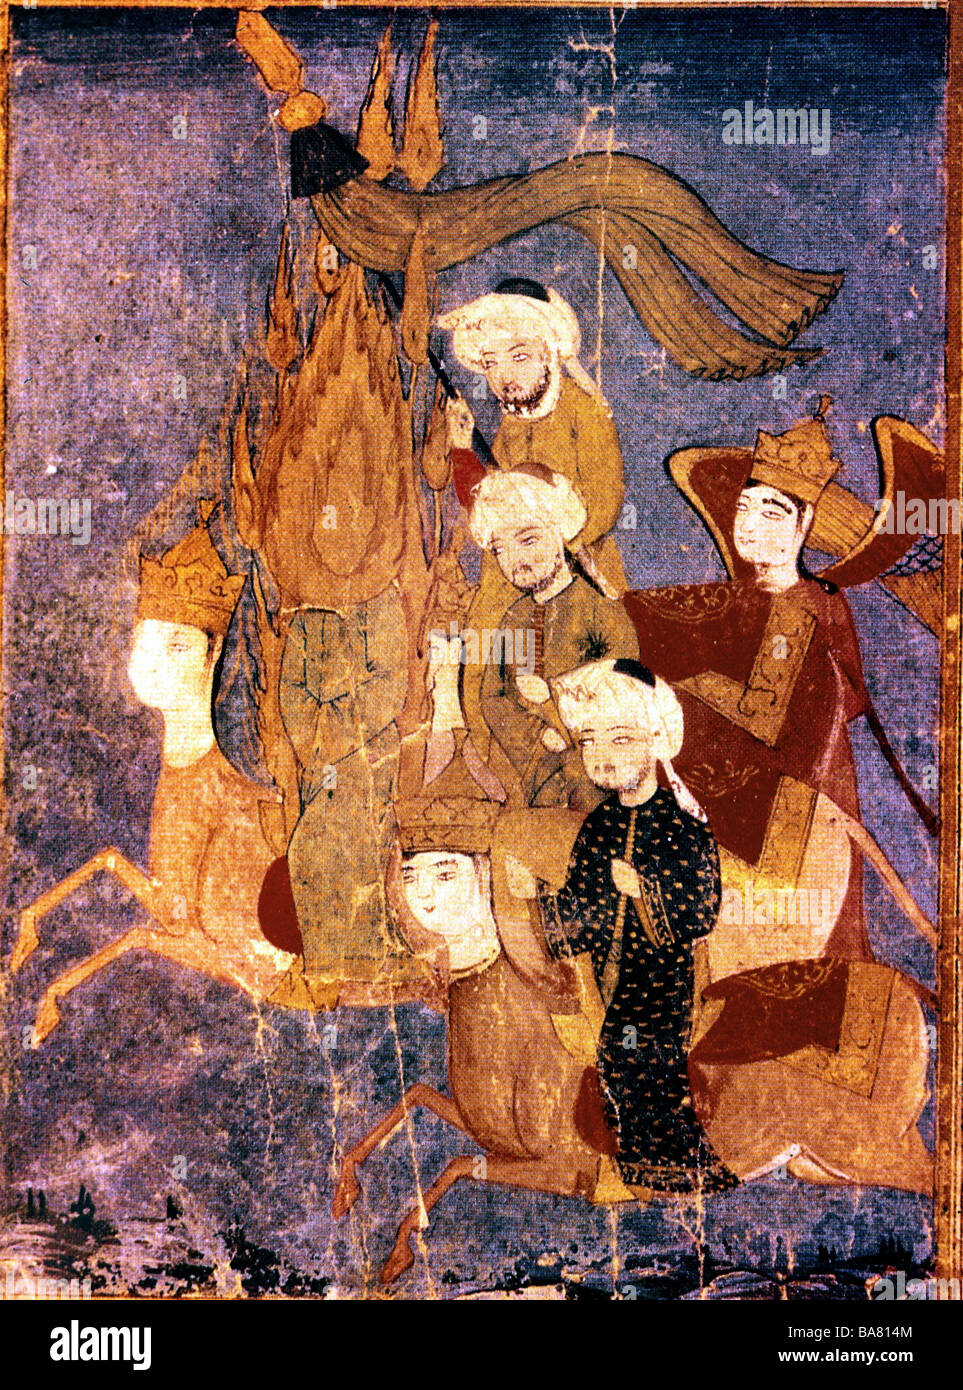 Muhammad (Abu al Kasim Muhammad ibn Abdallah), circa 570 - 8.6.632, Arabian Prophet, founder of Islam, with flame head and caliph and archangel Gabriel, Islamic miniature, Artist's Copyright has not to be cleared Stock Photo